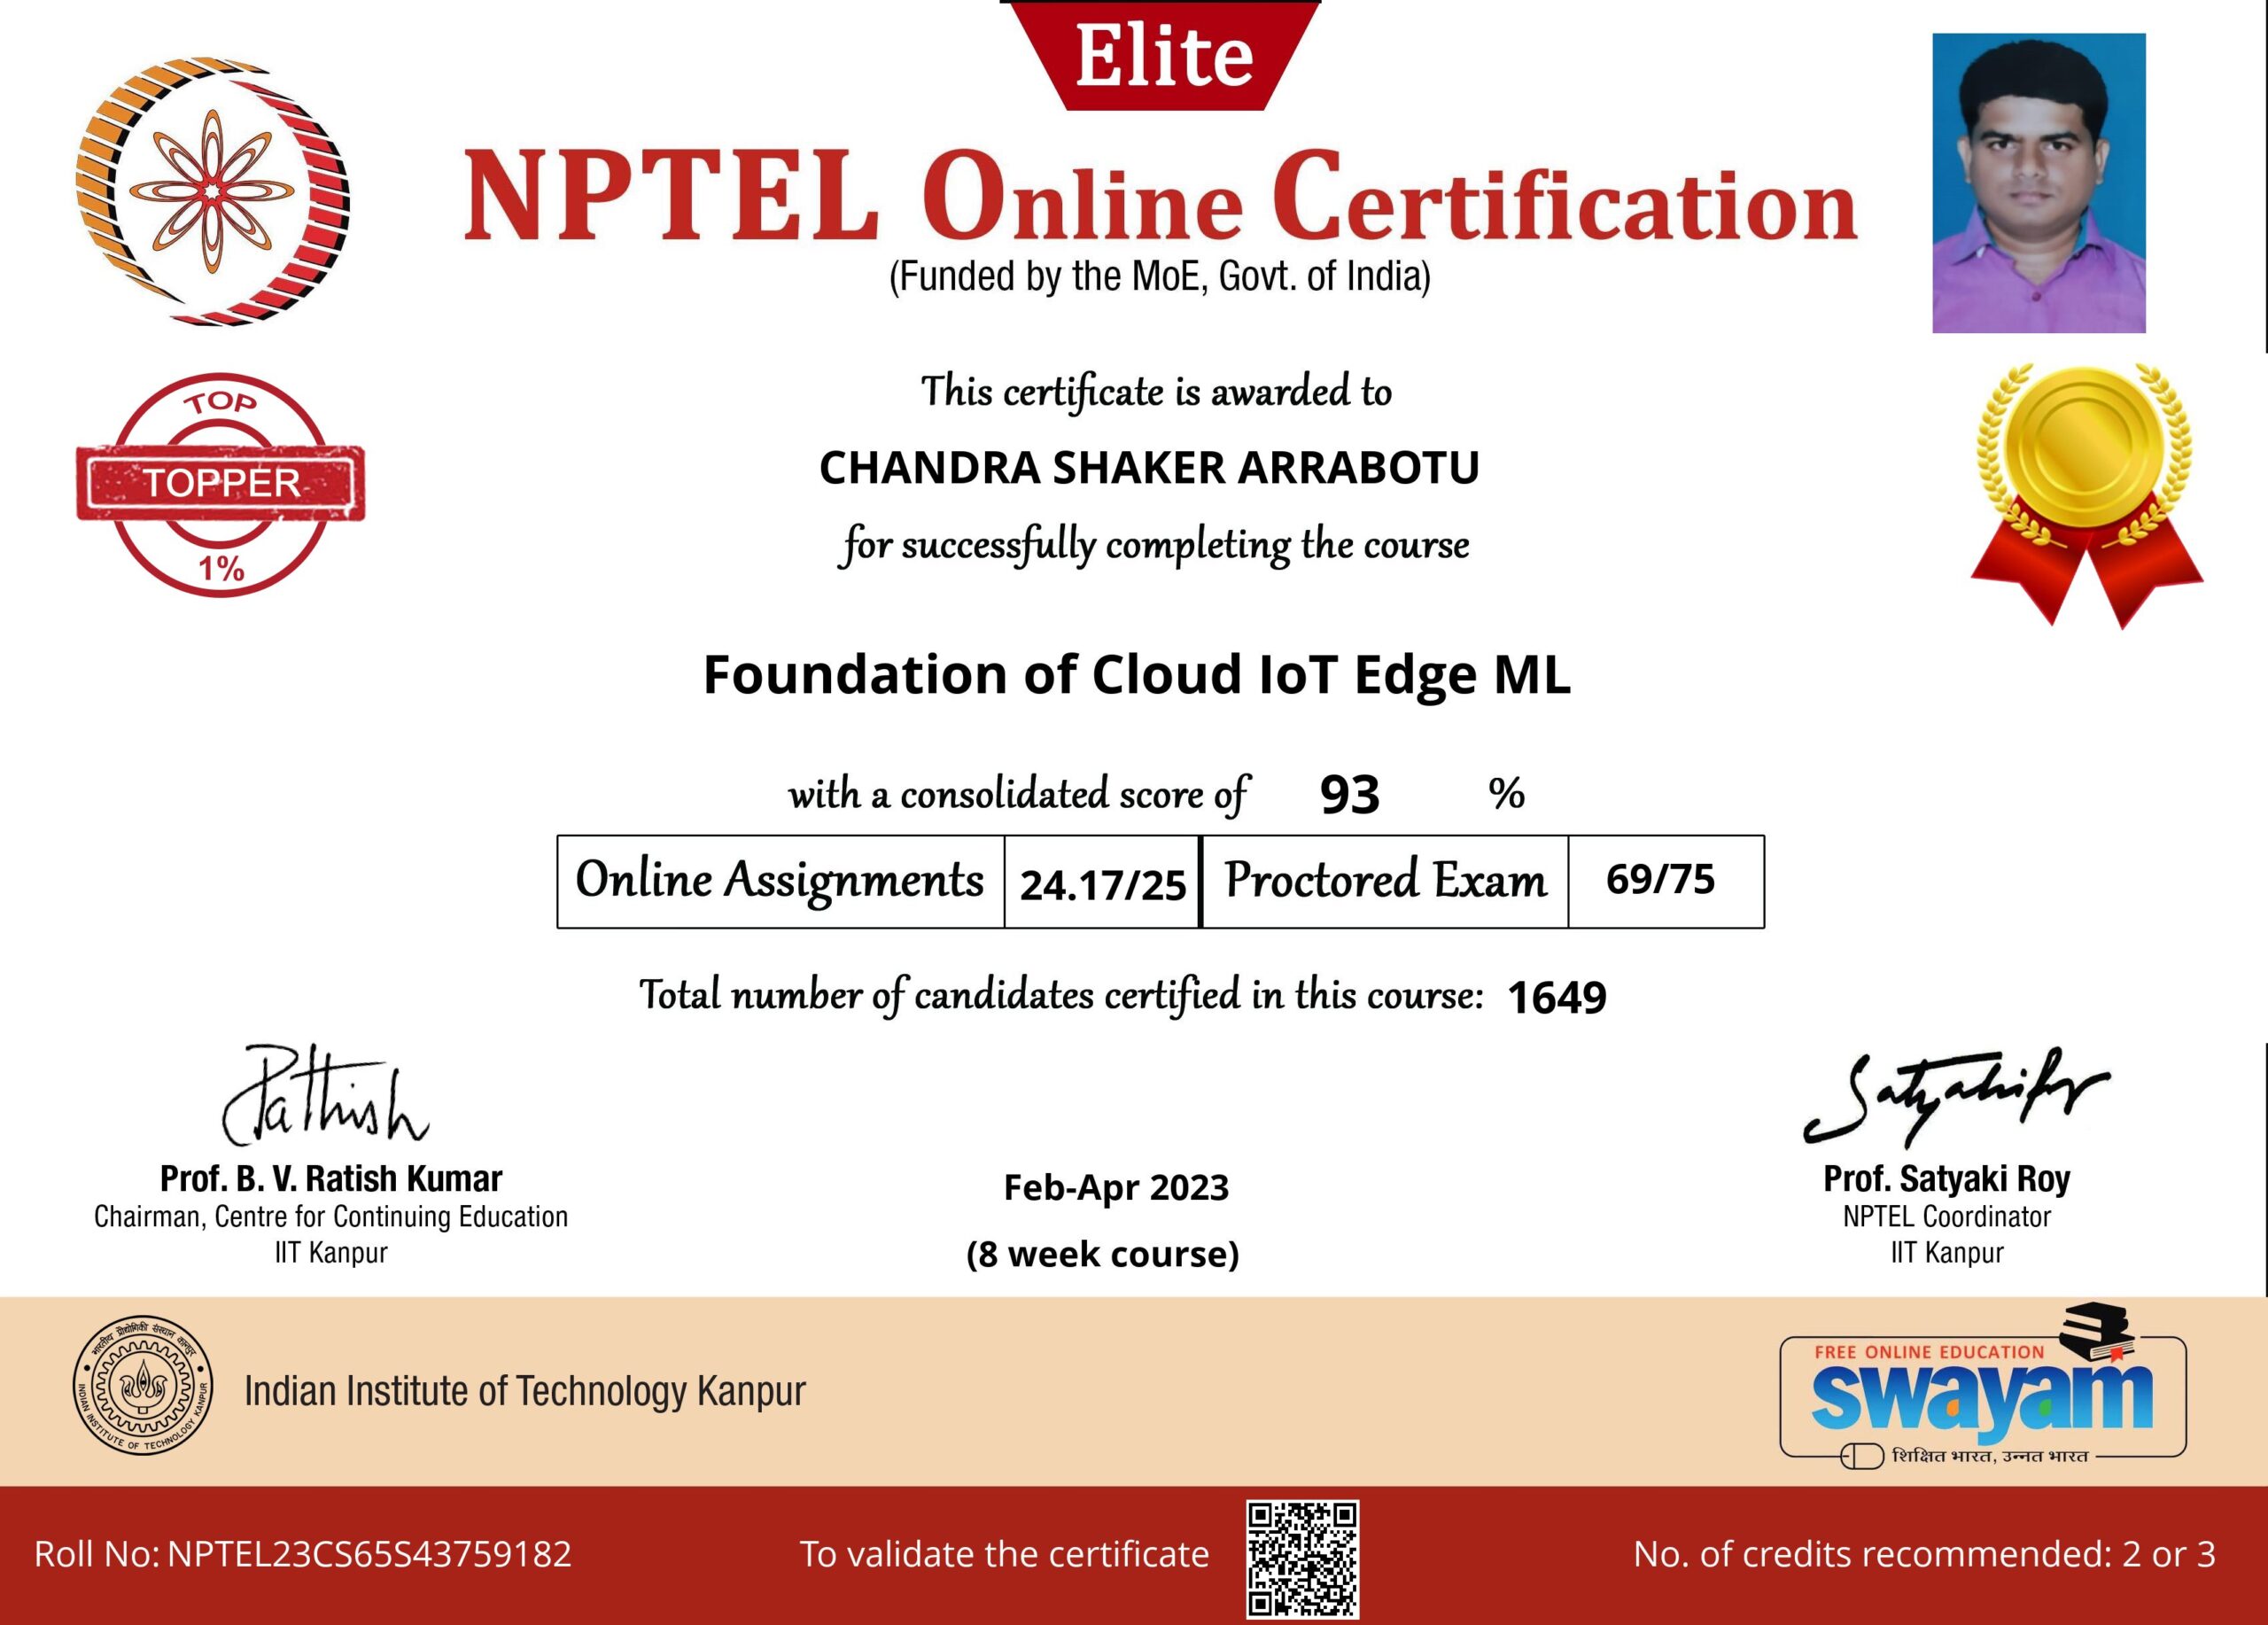 You are currently viewing My New NPTEL Achievement – TOPPER 1% ELITE GOLD Certificate